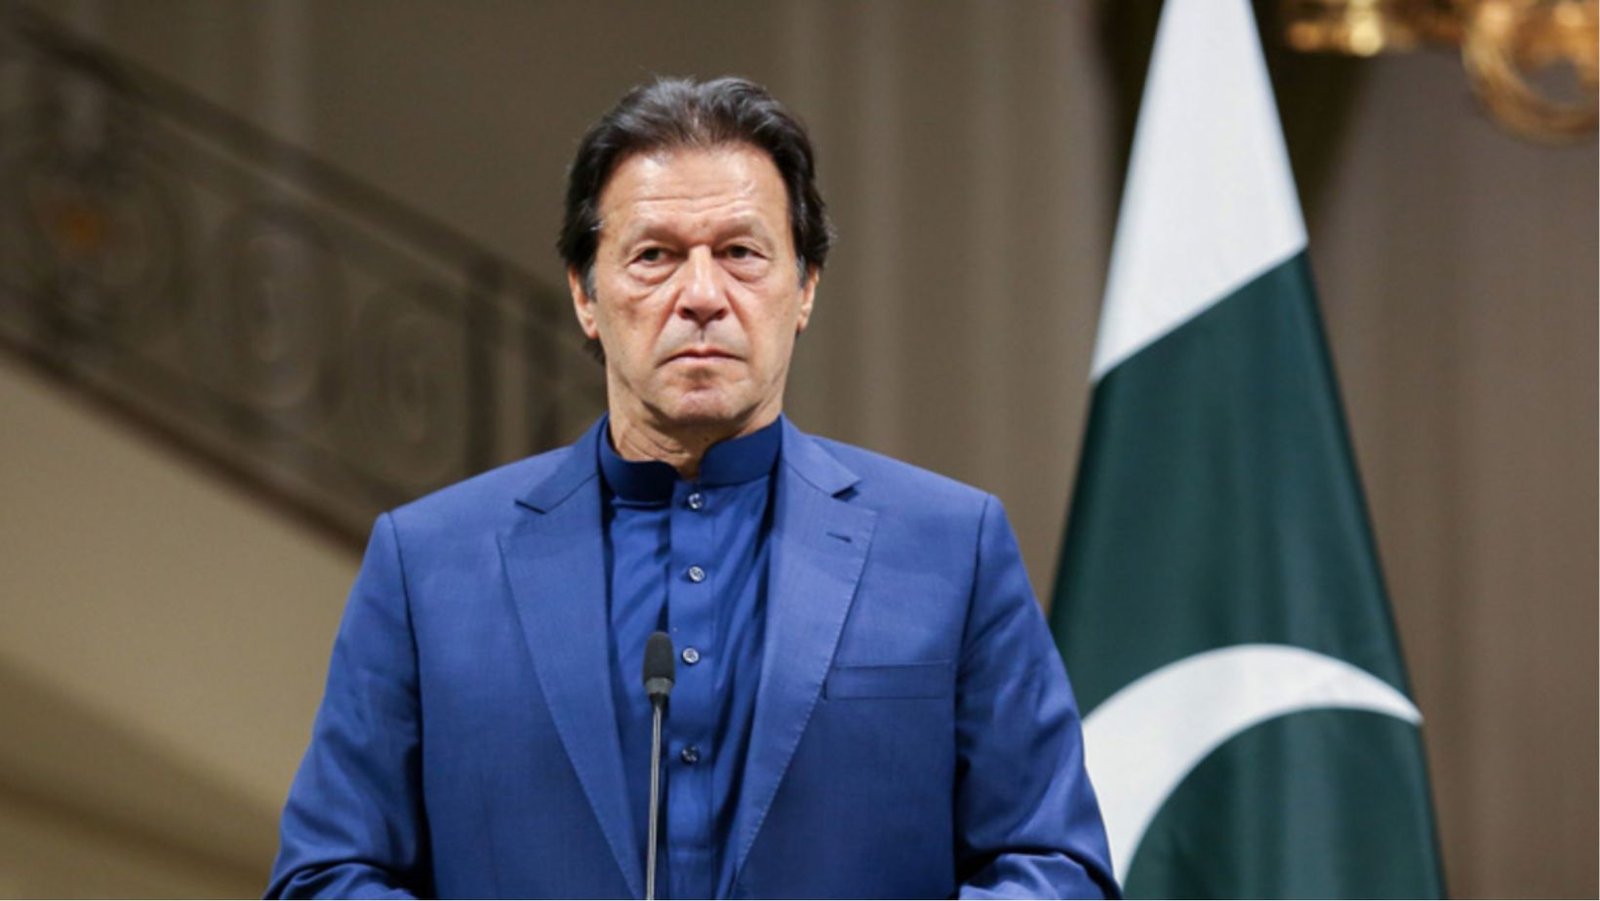 Imran defends contentious statements, saying "Thieves cannot be allowed to choose the next COAS."